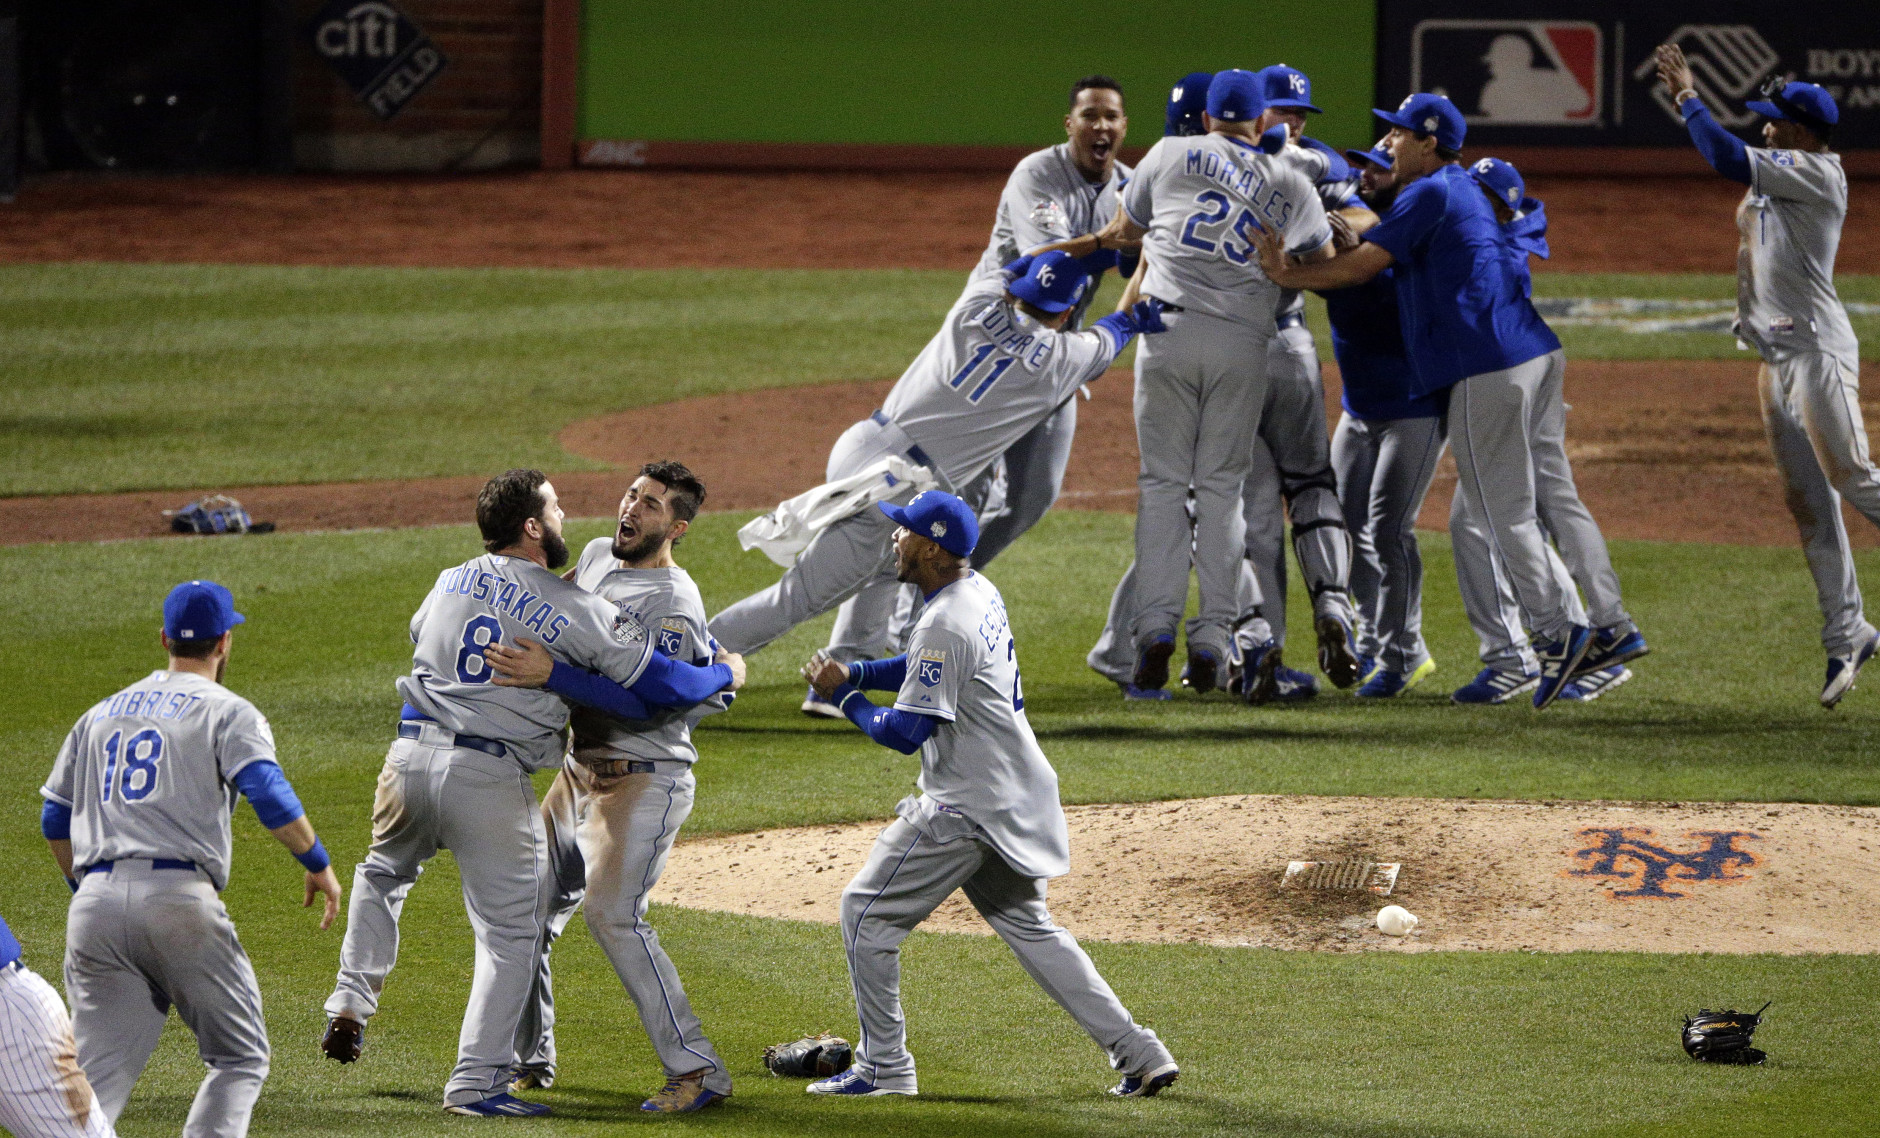 Member of the Kansas City Royals celebrates after Game 5 of the Major League Baseball World Series against the New York Mets Monday, Nov. 2, 2015, in New York. The Royals won 7-2 to win the series. (AP Photo/Charlie Riedel)